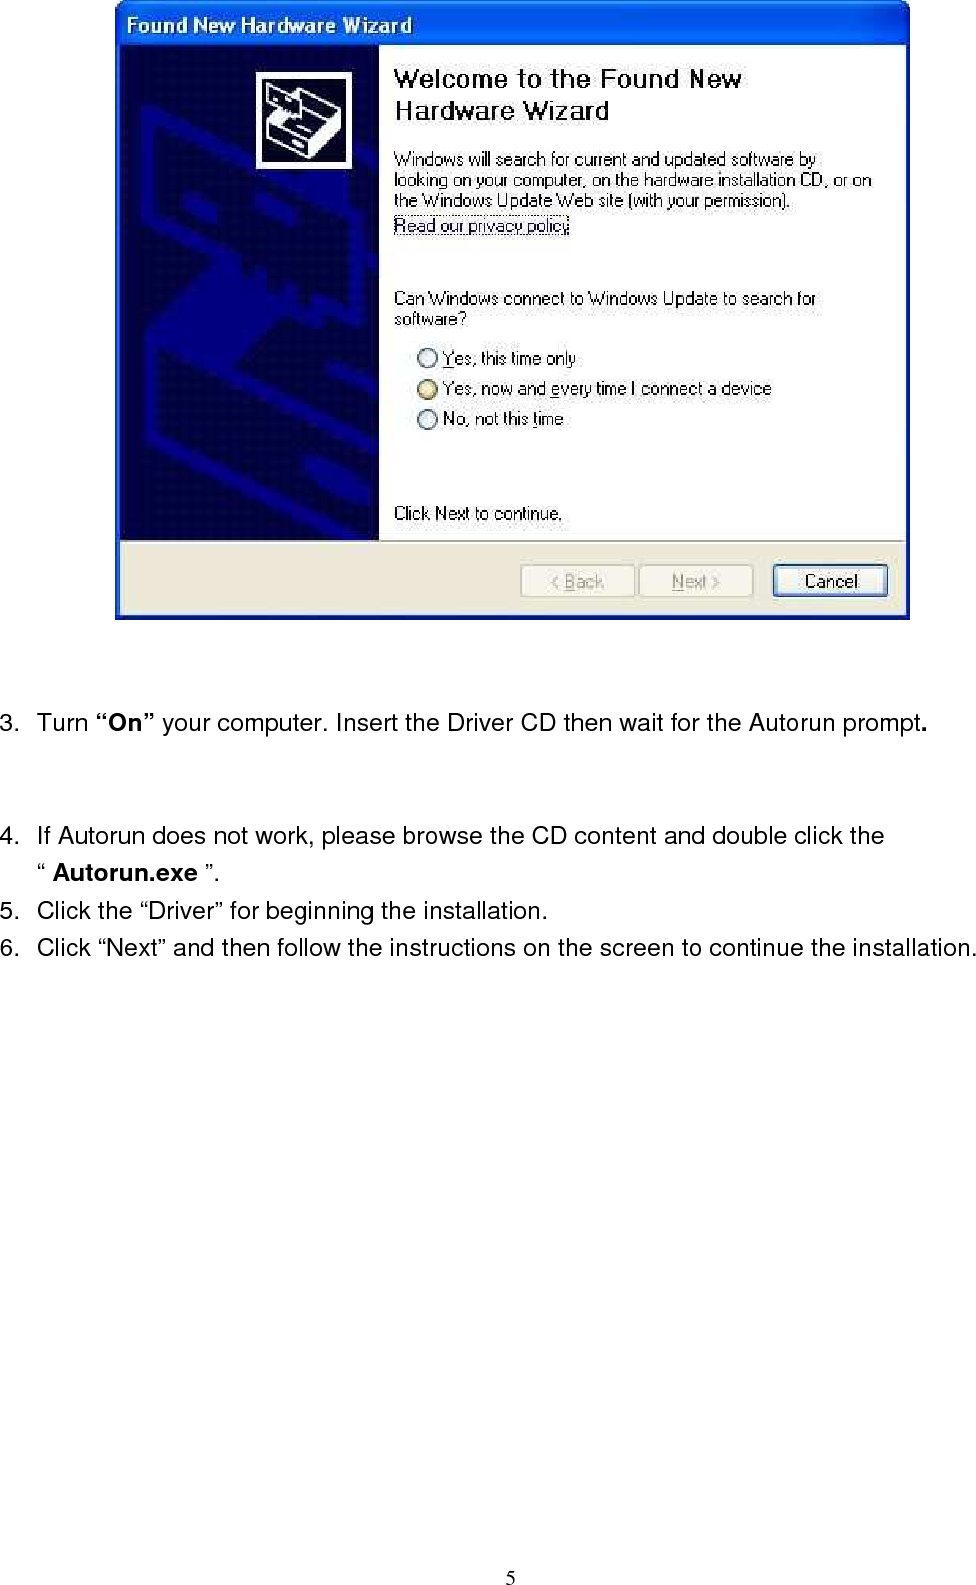  5    3.  Turn “On” your computer. Insert the Driver CD then wait for the Autorun prompt.   4.  If Autorun does not work, please browse the CD content and double click the “ Autorun.exe ”. 5.  Click the “Driver” for beginning the installation. 6.  Click “Next” and then follow the instructions on the screen to continue the installation.  